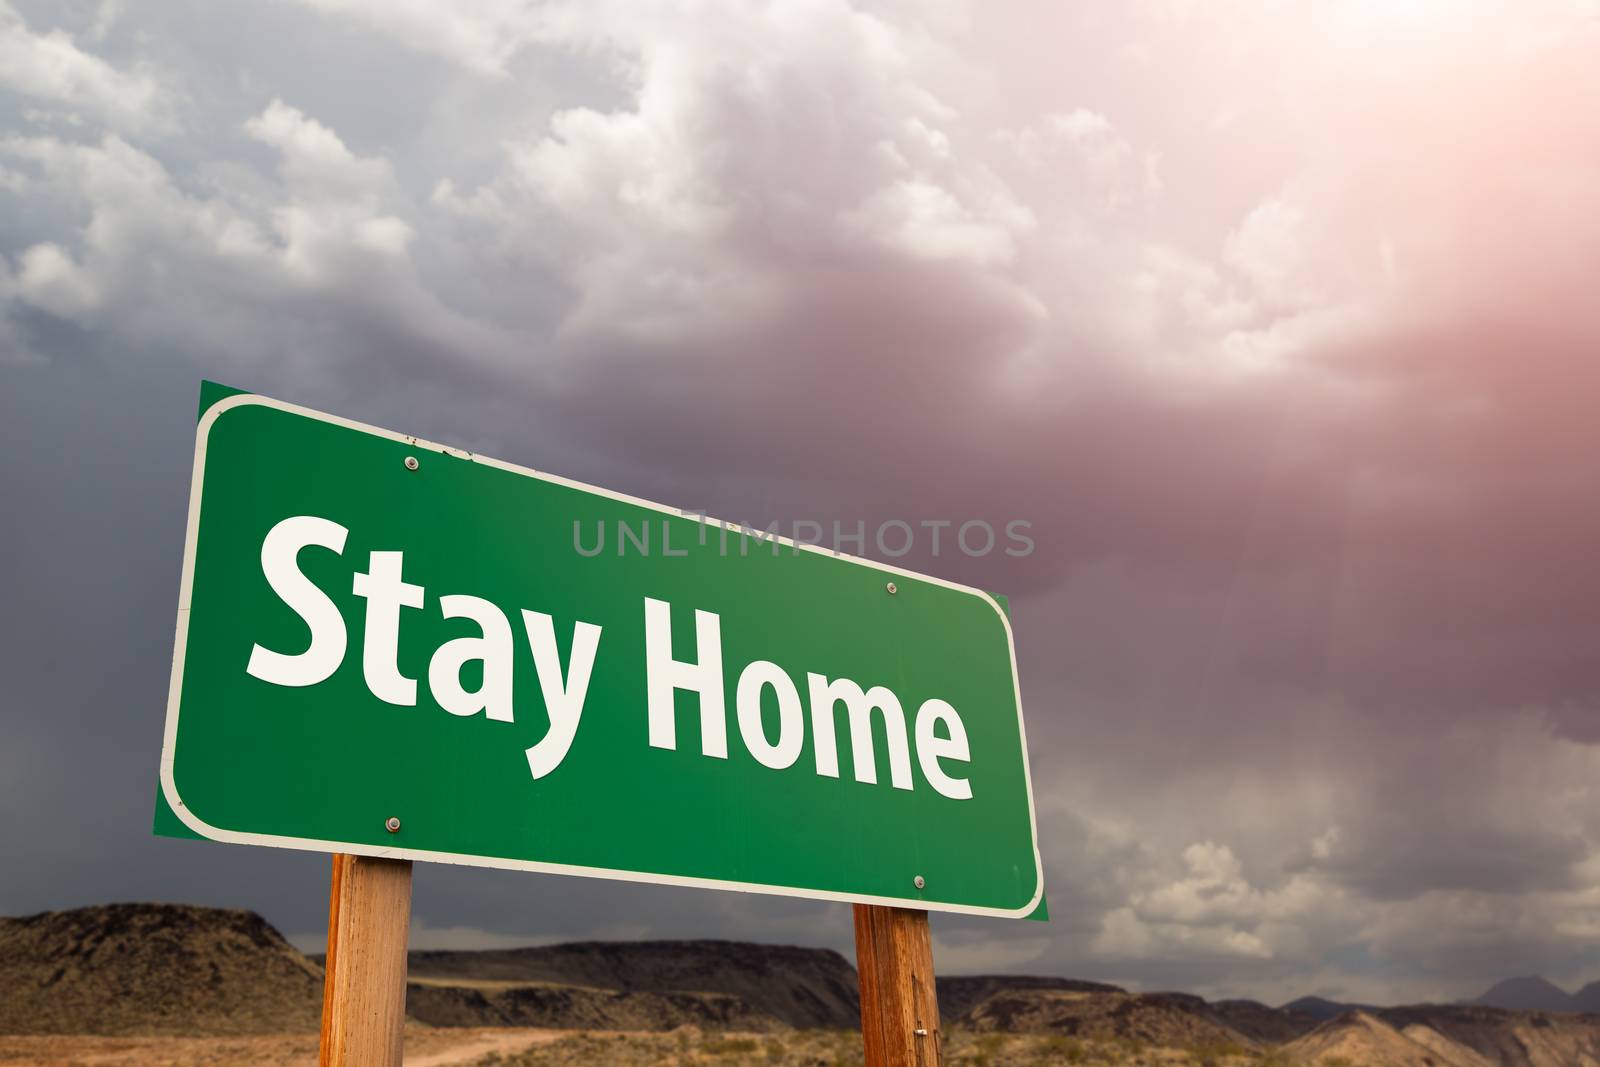 Stay Home Green Road Sign Against Ominous Stormy Cloudy Sky by Feverpitched